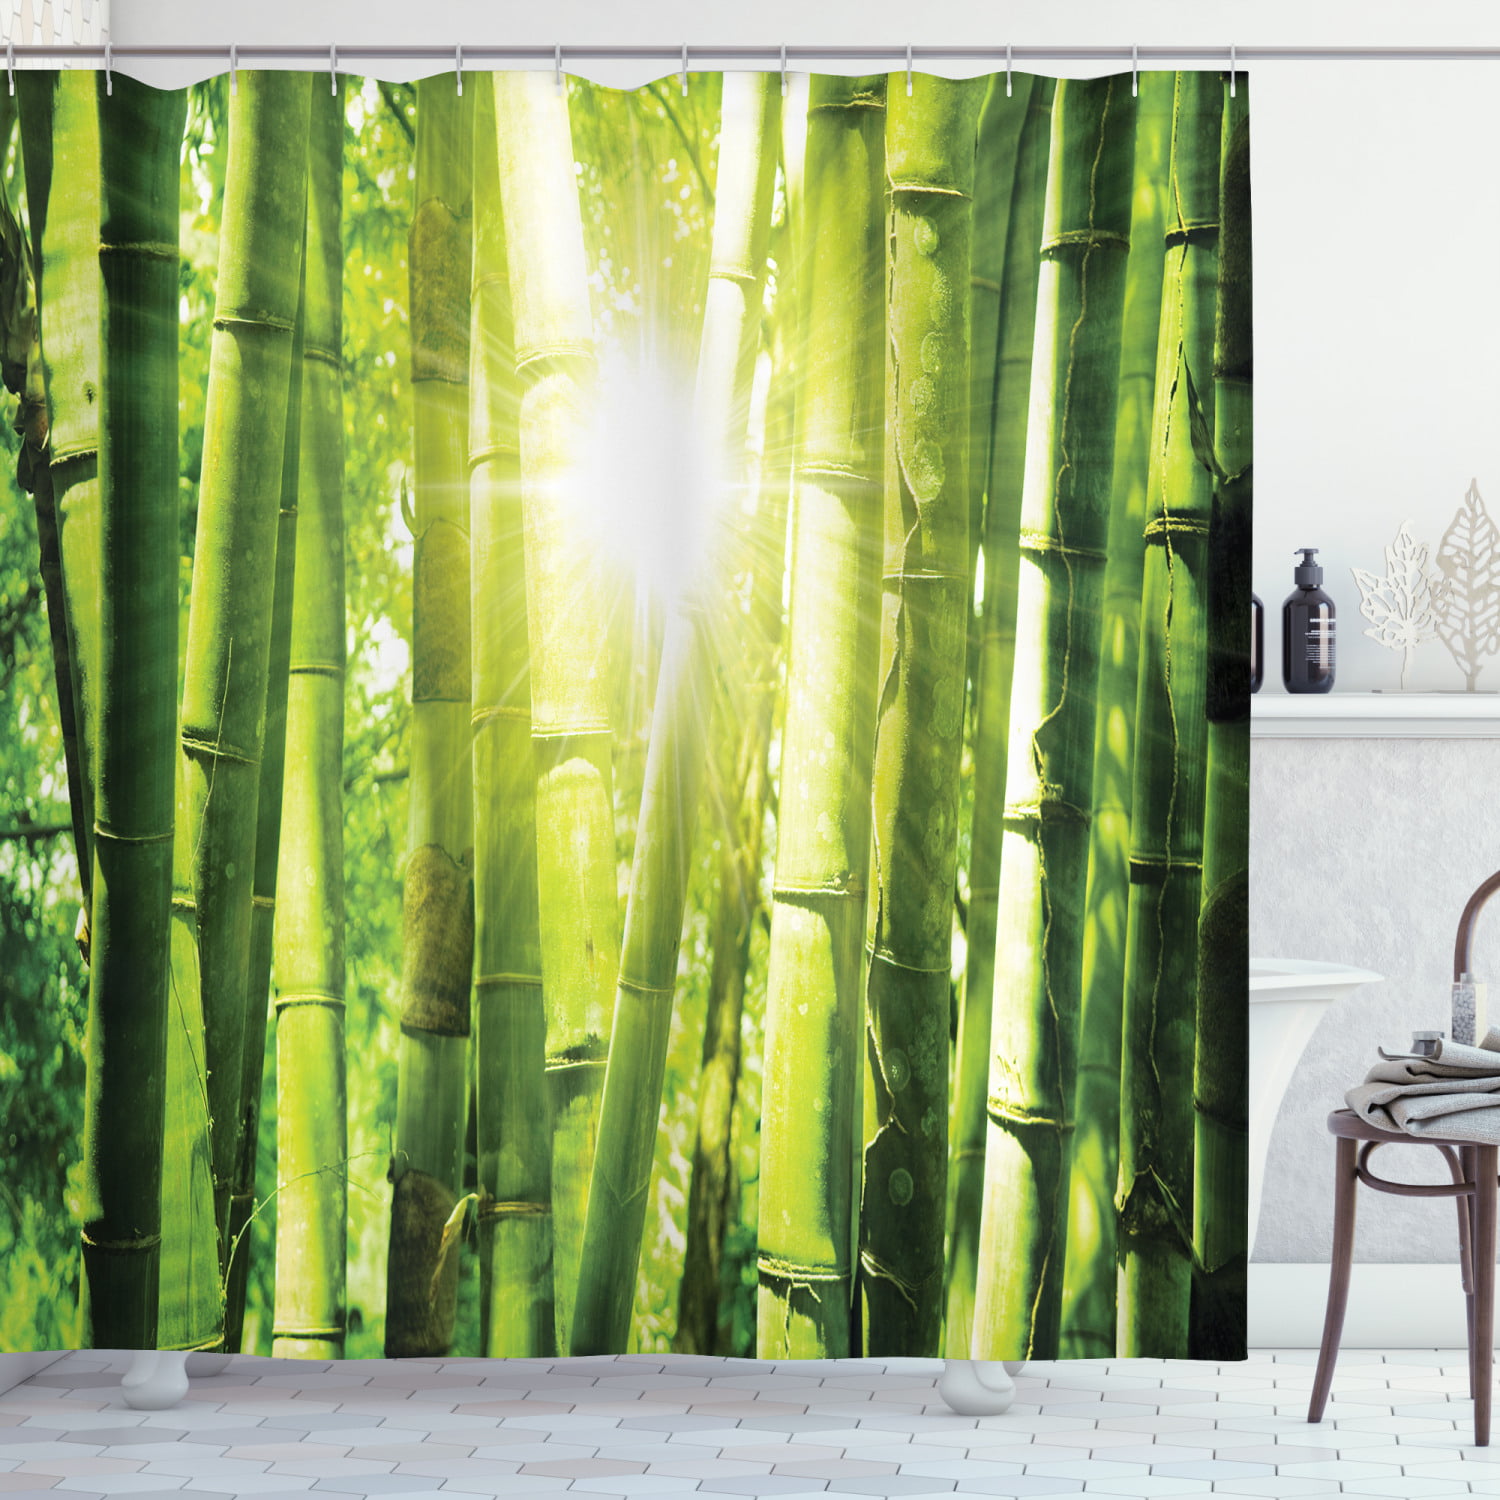 Shower Curtain Set Polyester Waterproof Fabric Sprout Bamboo Forest Background 